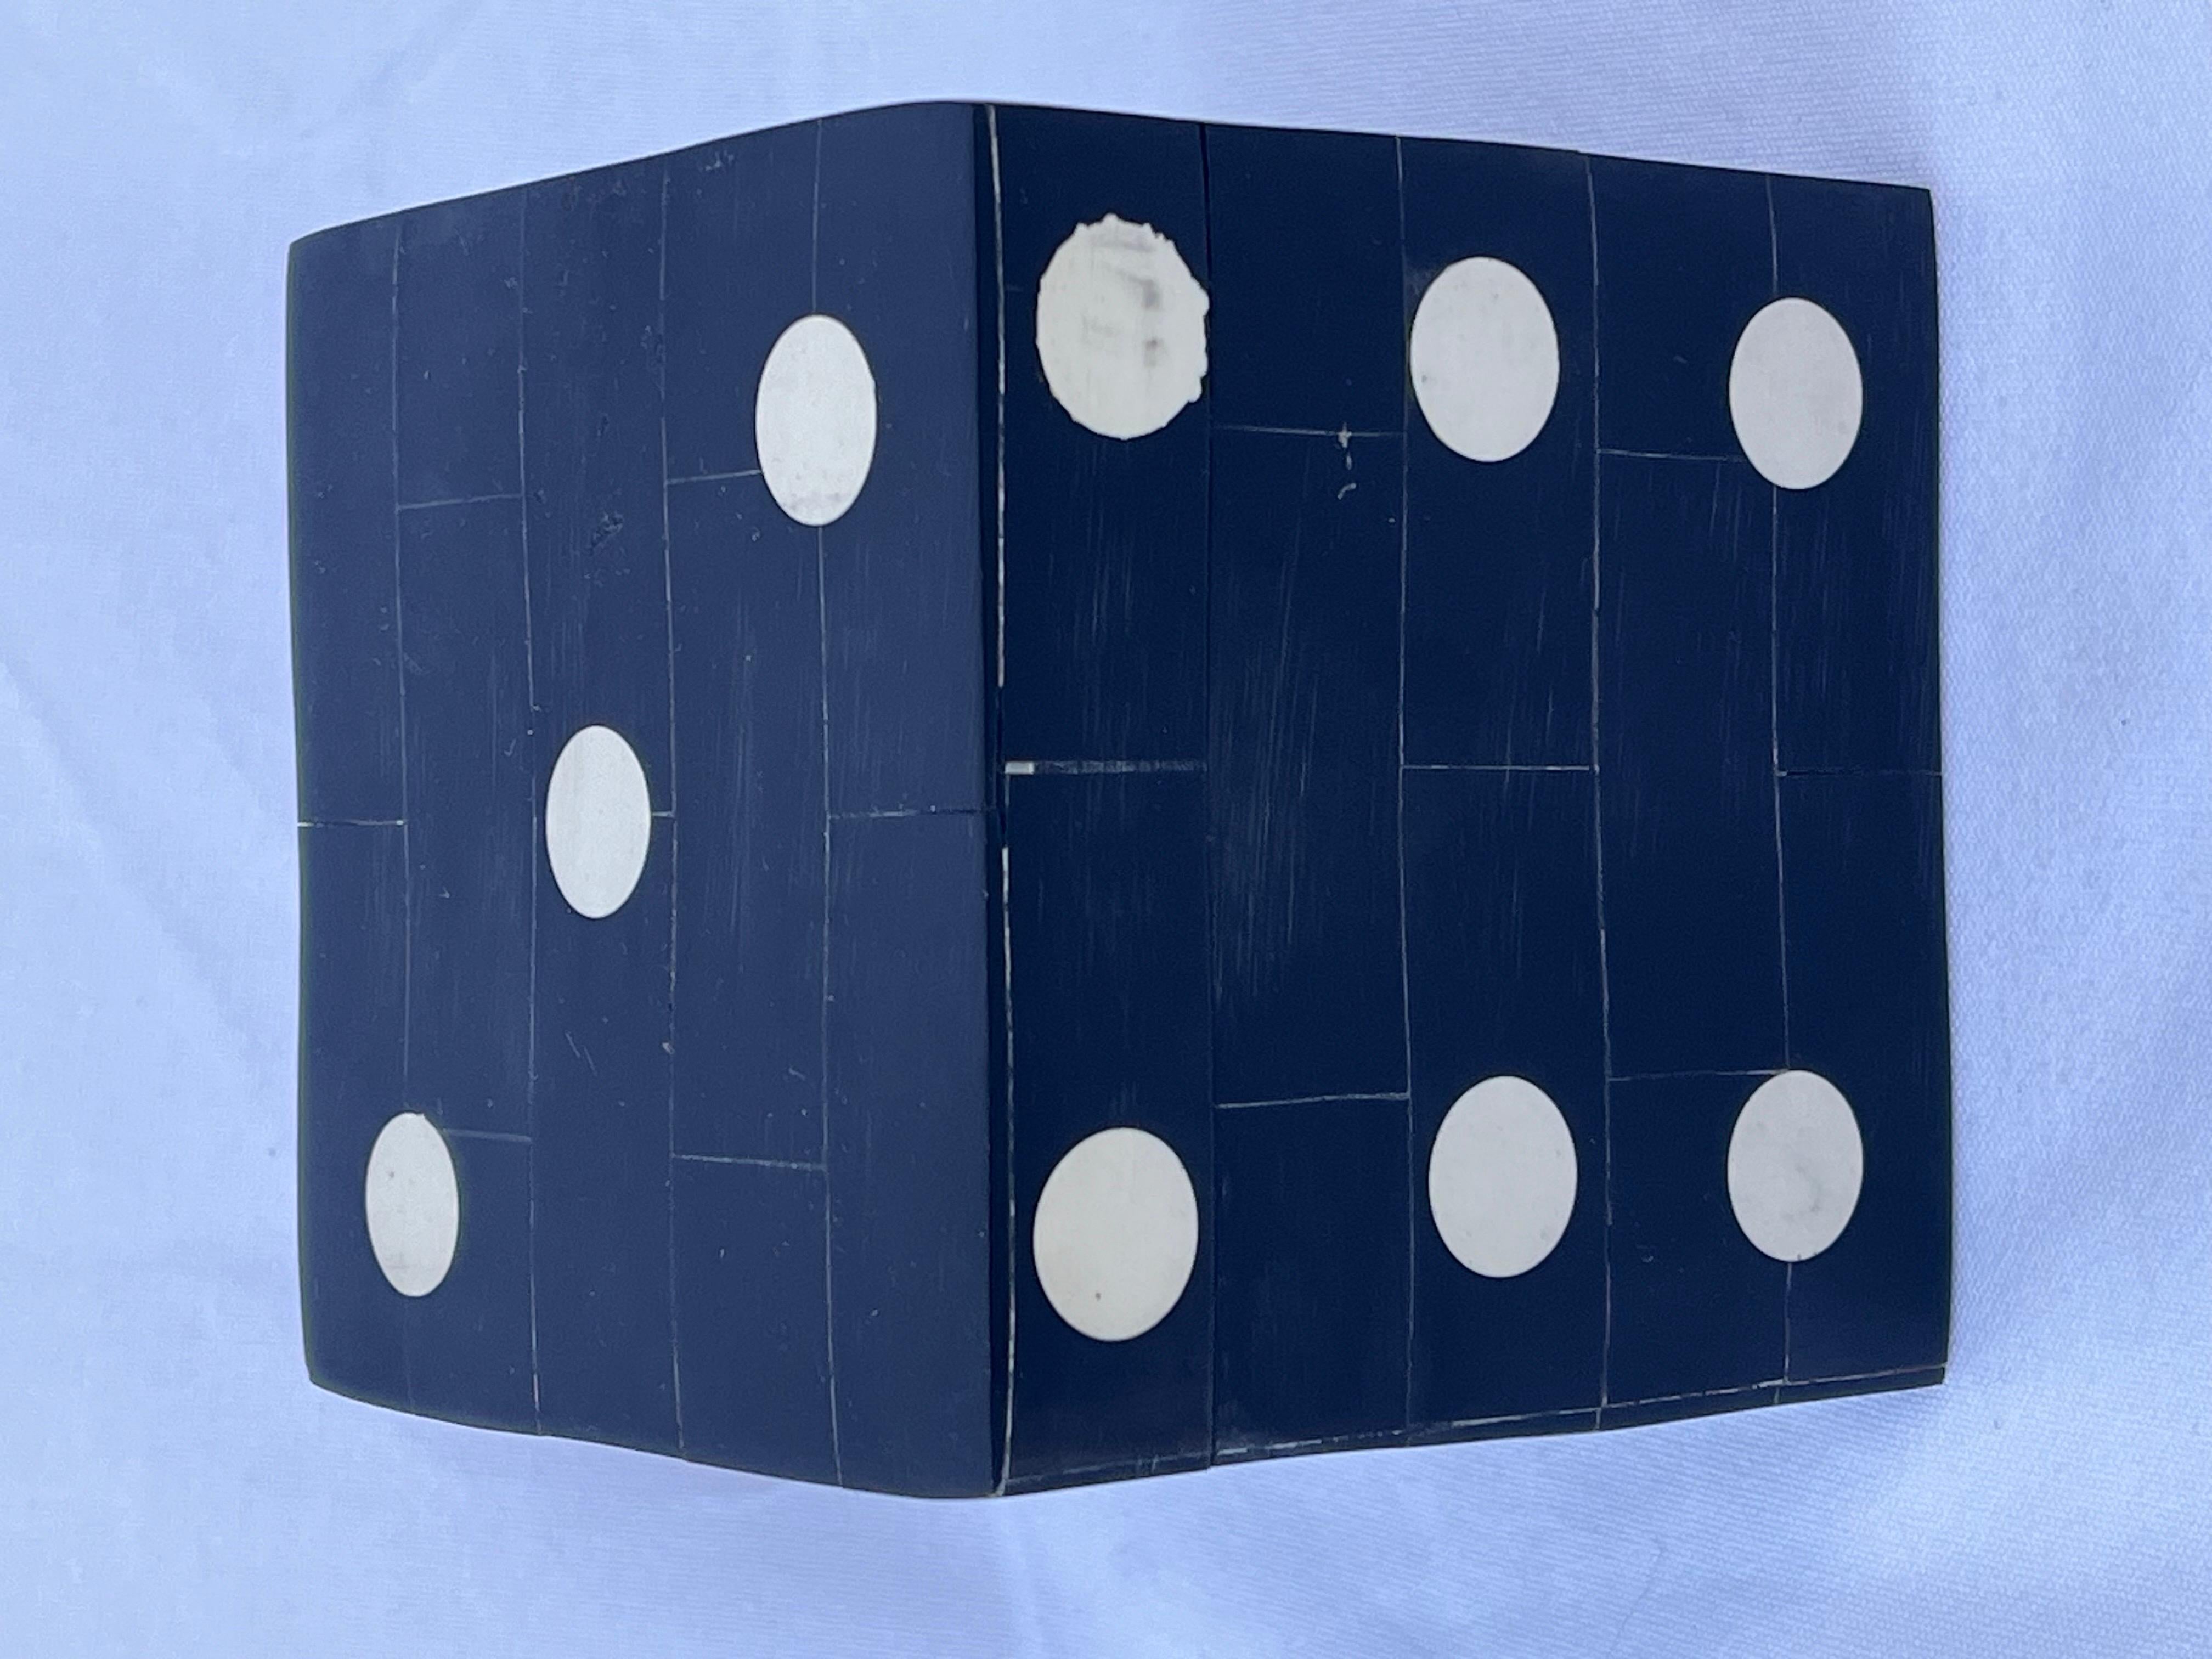 Tessellated Vintage Dice or Die Lidded Cube Box Paperweight Desk Accessory  In Good Condition For Sale In Atlanta, GA